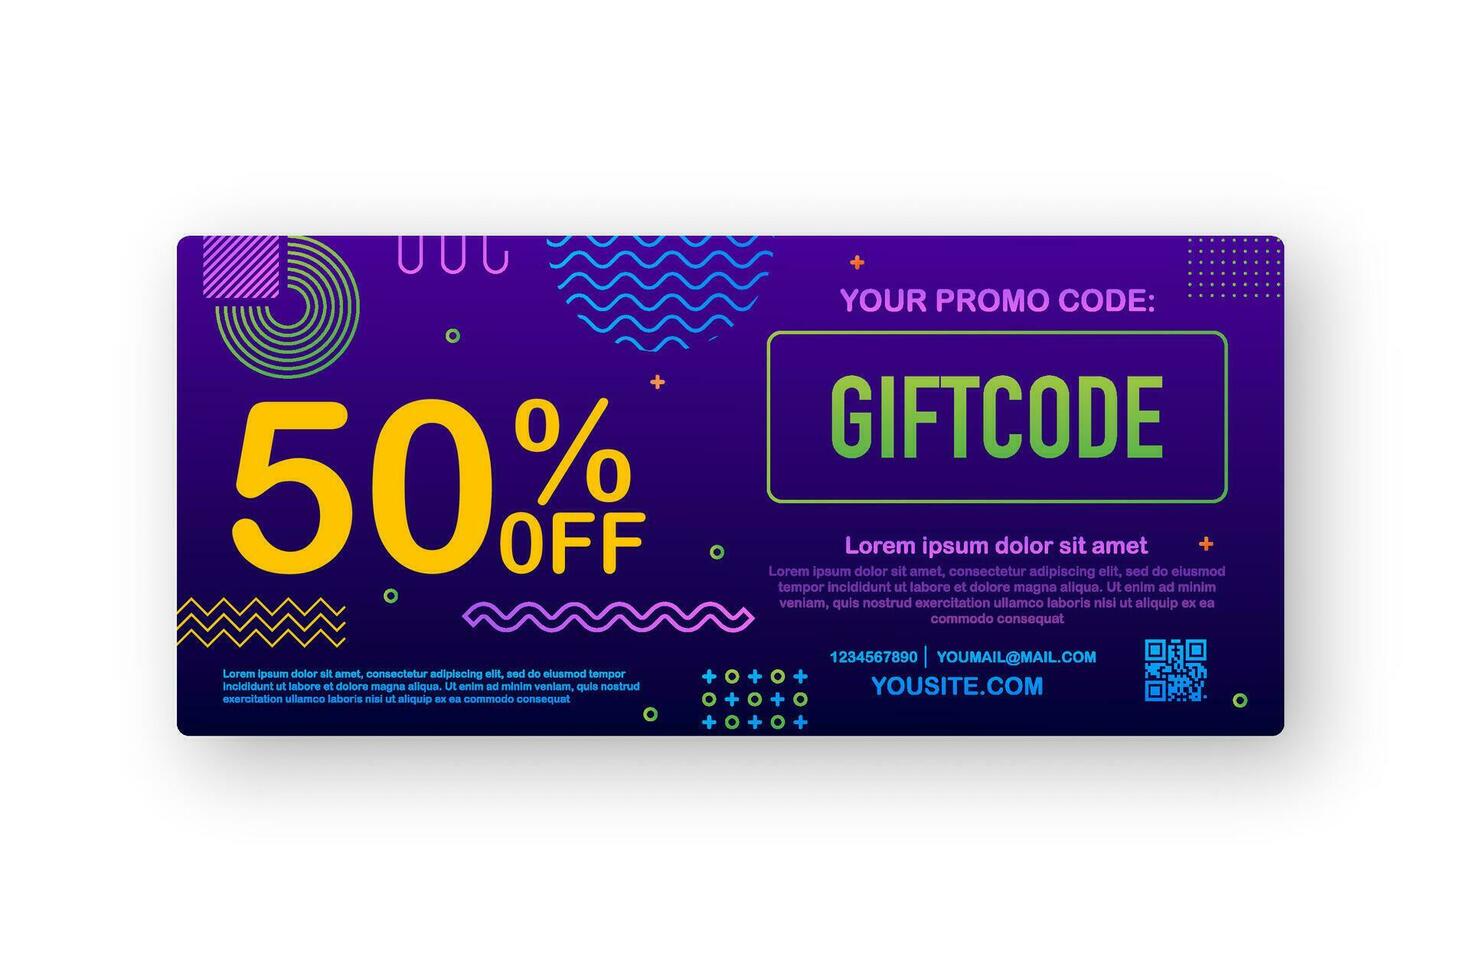 Promo code. Vector Gift Voucher with Coupon Code. Premium eGift Card Background for E commerce, Online Shopping. Marketing. Vector illustration